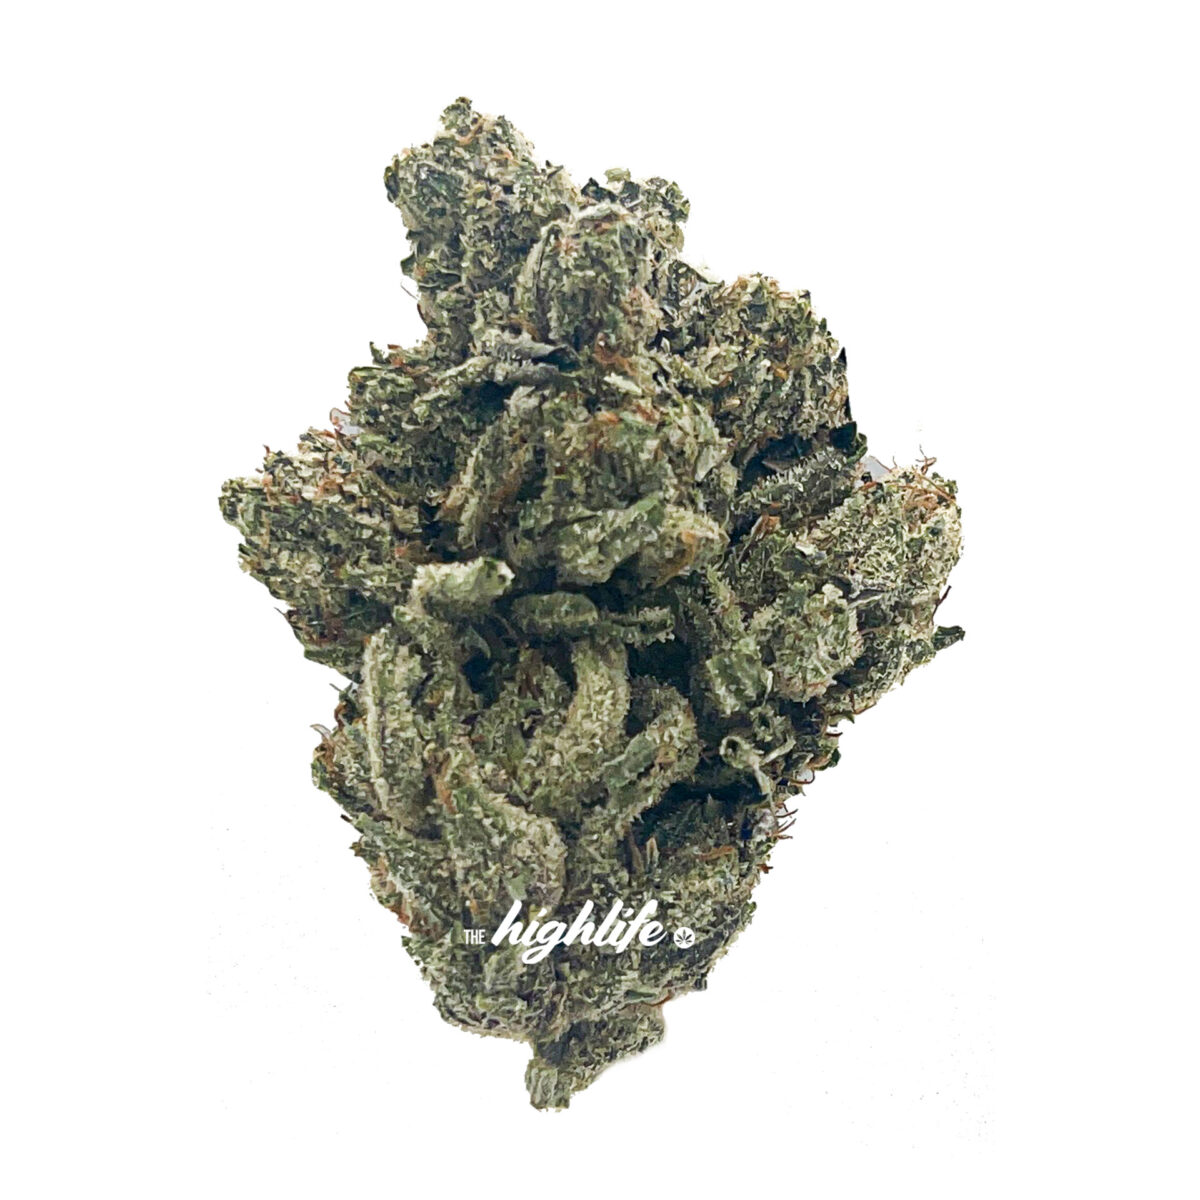 buy weed online - same day delivery in Ottawa - Gas face cannabis strain